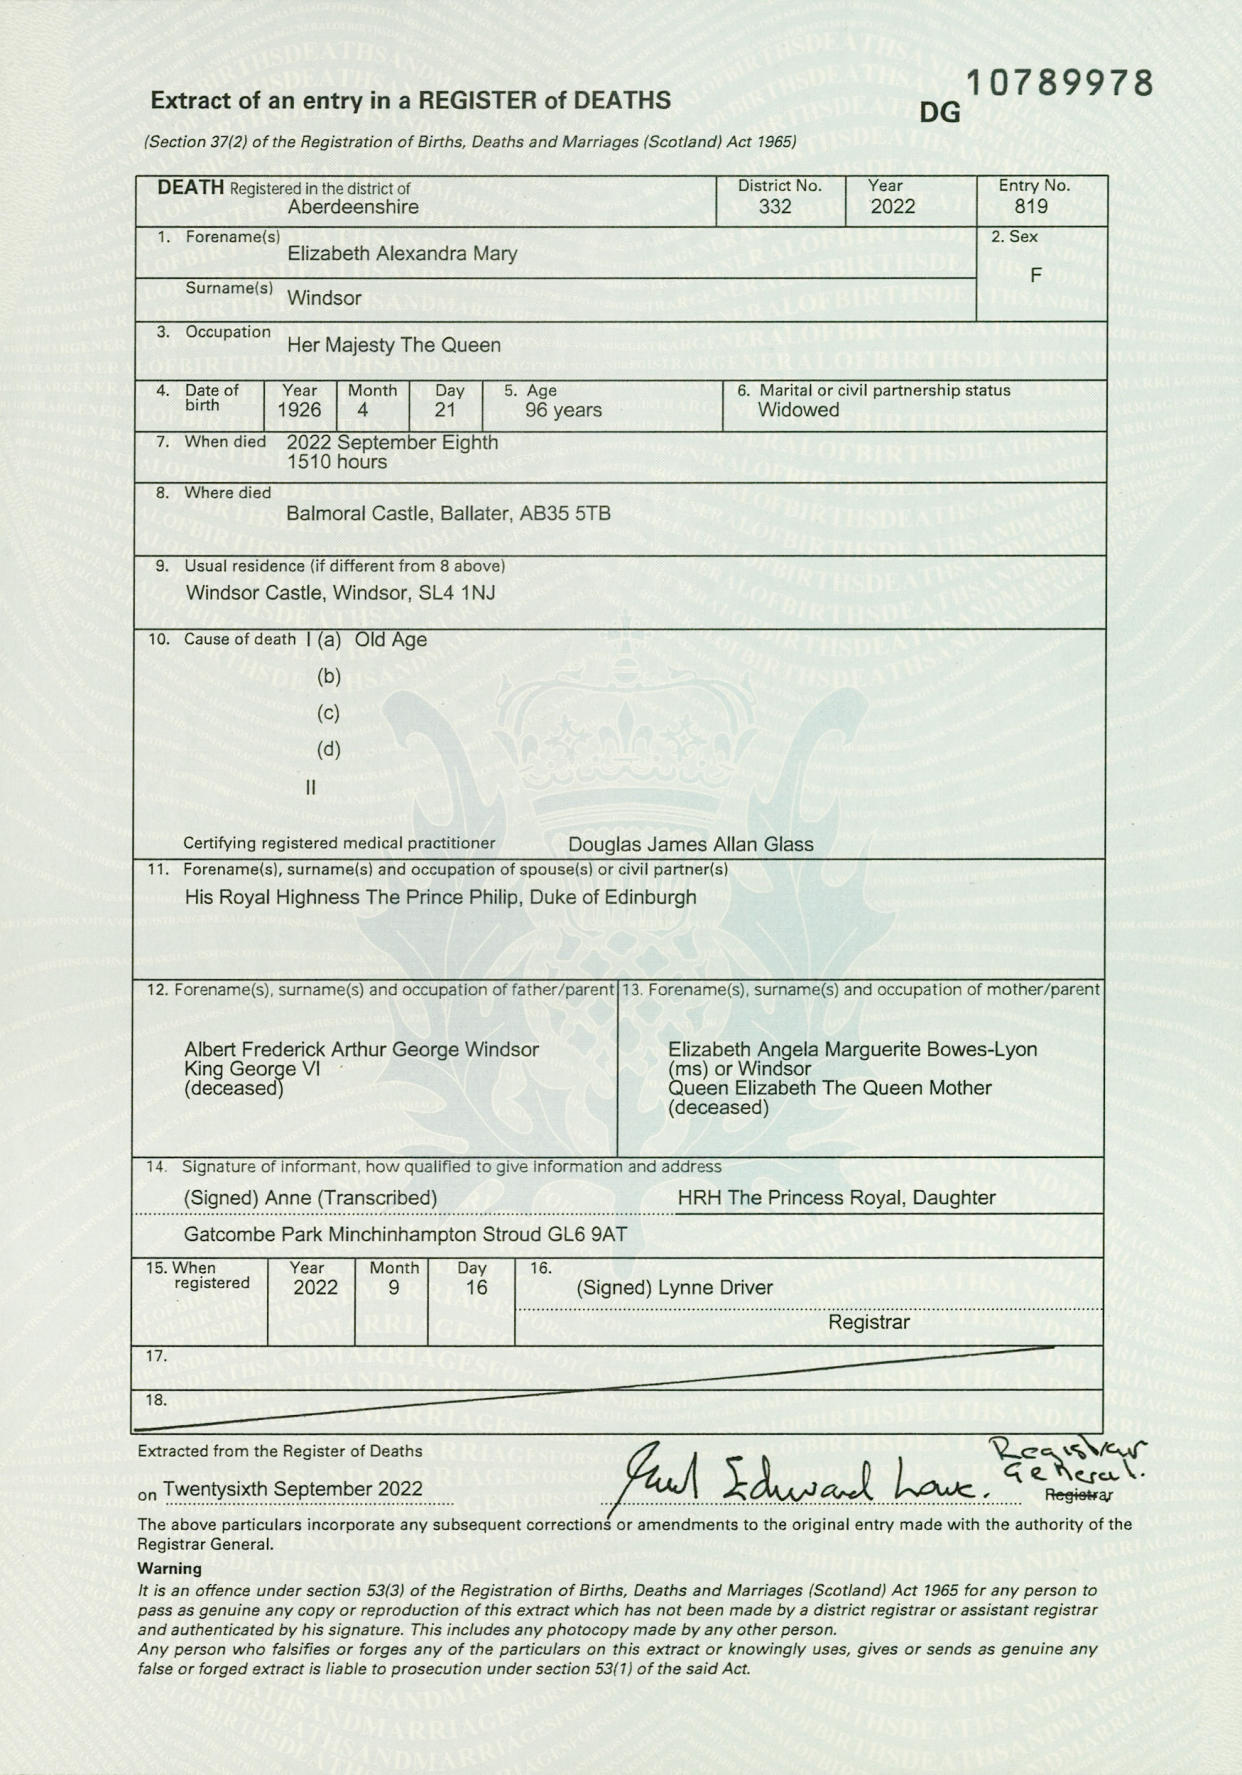 The death certificate of Queen Elizabeth II reveals how she died. (National Records of Scotland)